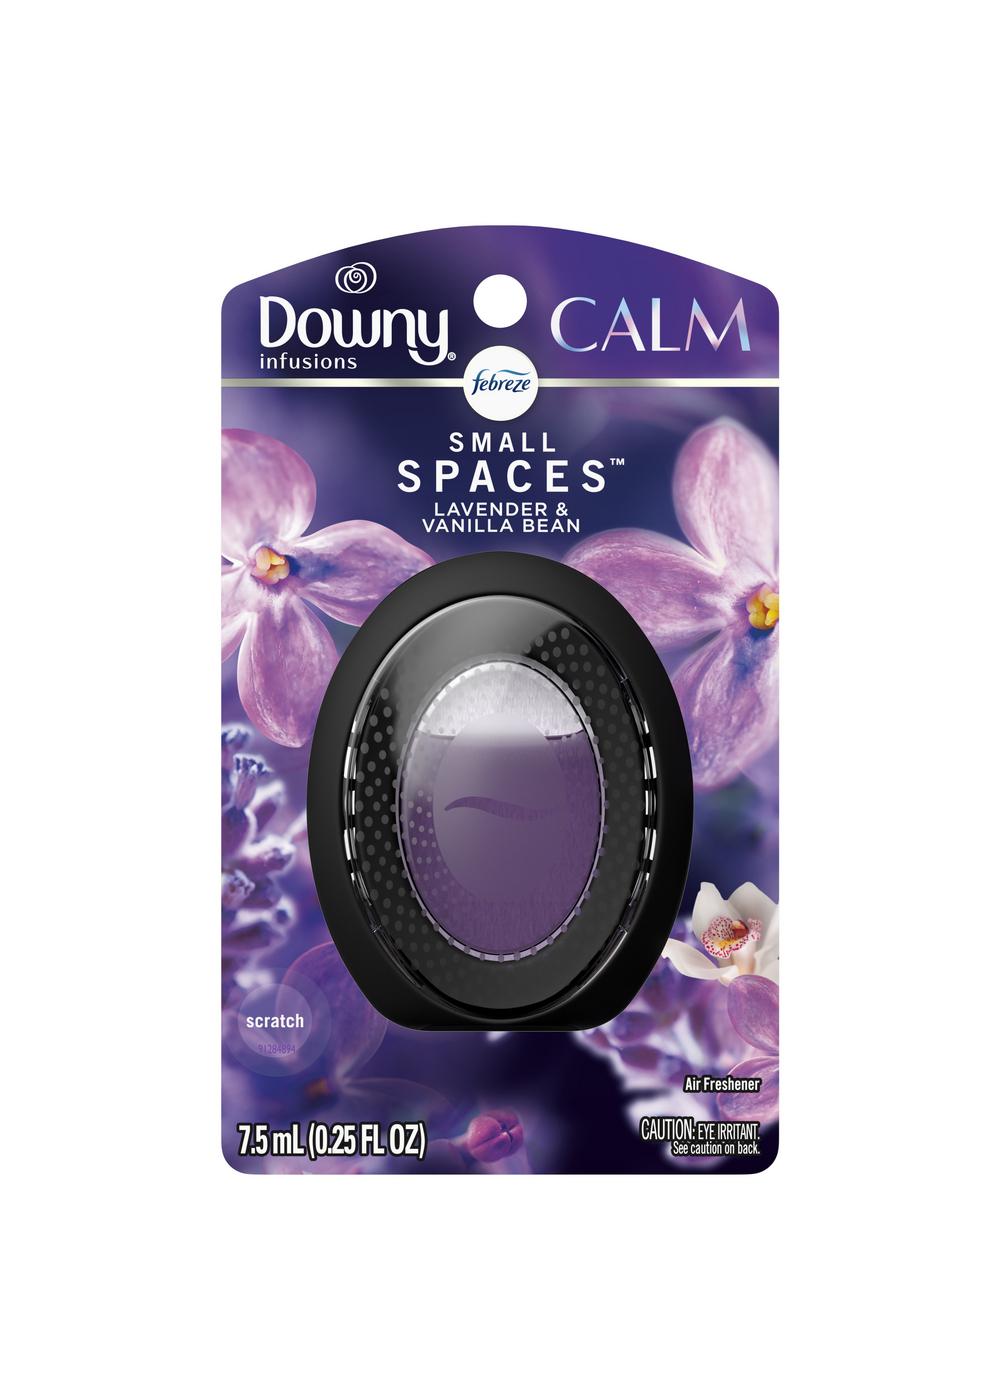 Febreze Small Spaces Air Freshener - Downy Infusions Calm Lavender & Vanilla Bean; image 1 of 2